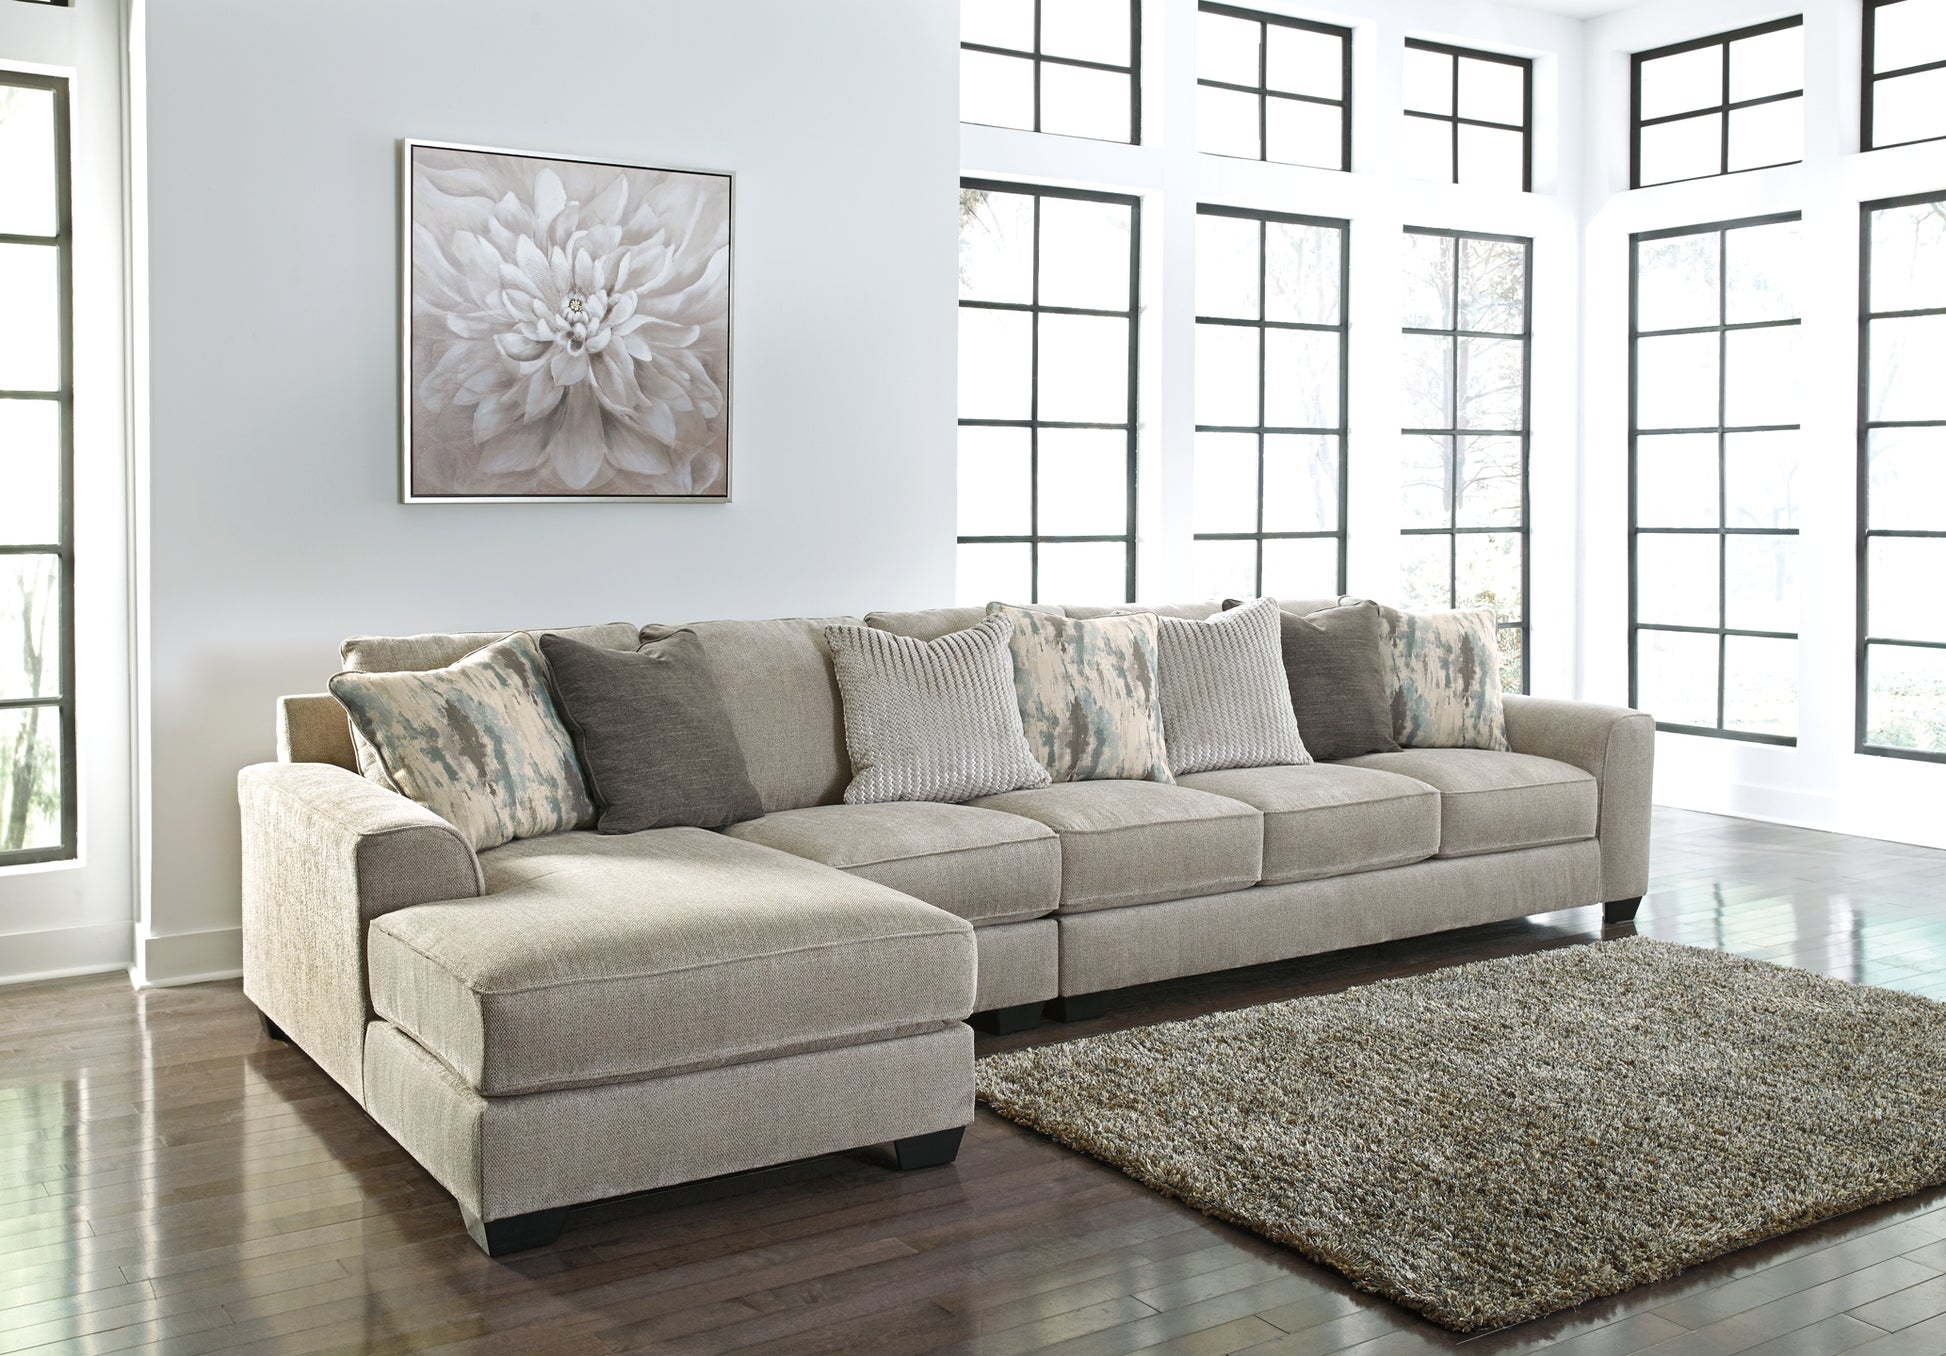 Ardsley 3-Piece Sectional with Chaise Wilson Furniture (OH)  in Bridgeport, Ohio. Serving Bridgeport, Yorkville, Bellaire, & Avondale